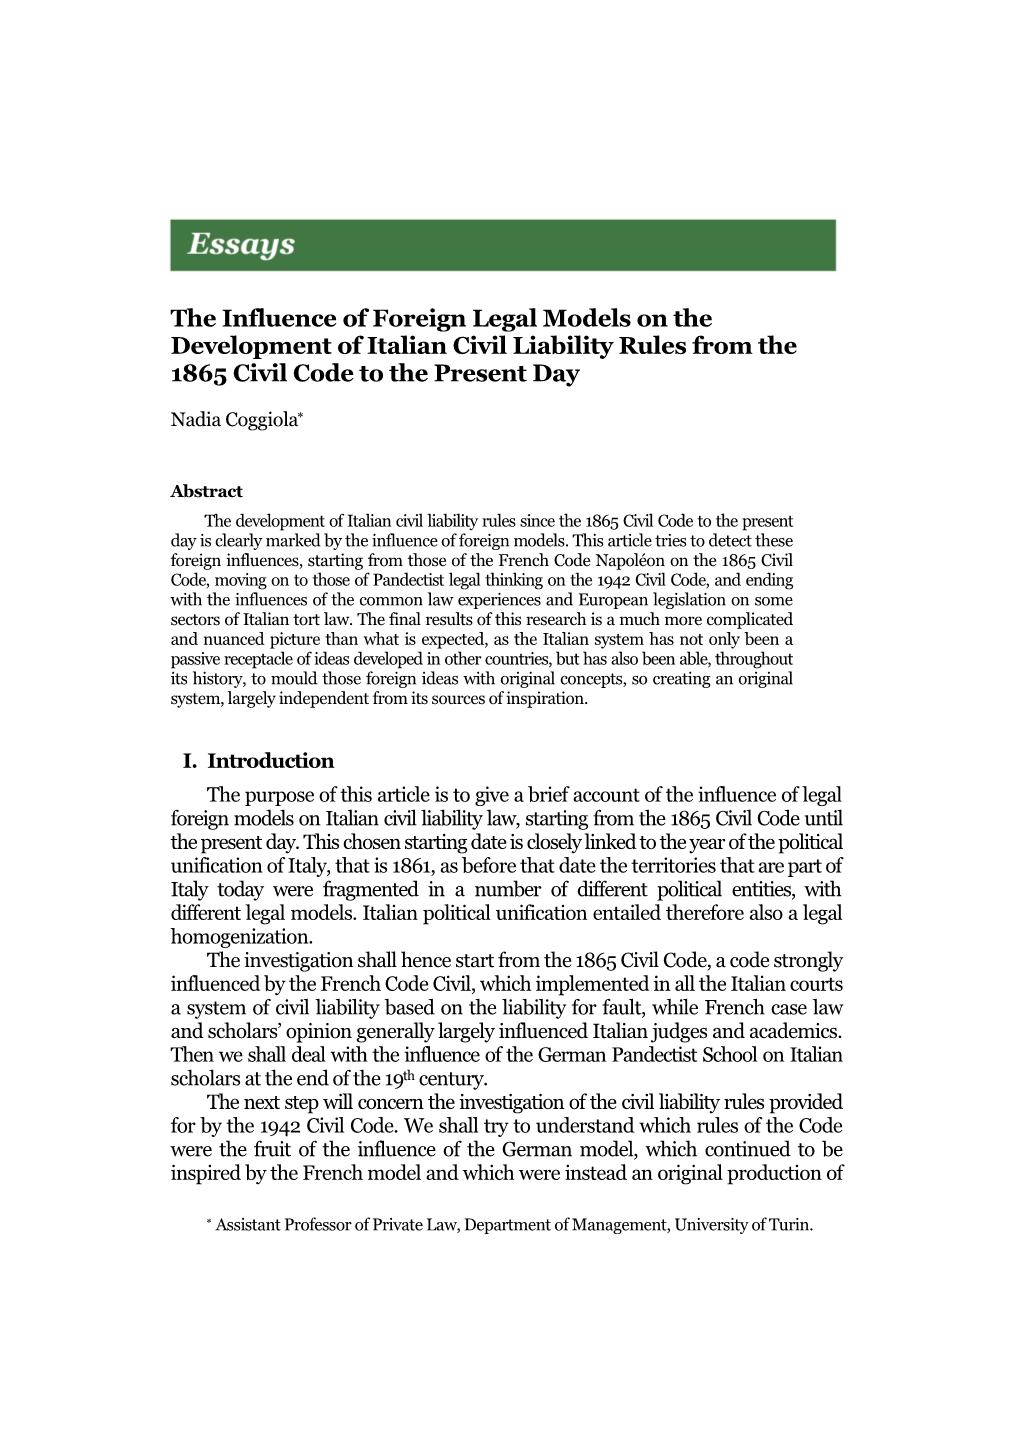 The Influence of Foreign Legal Models on the Development of Italian Civil Liability Rules from the 1865 Civil Code to the Present Day